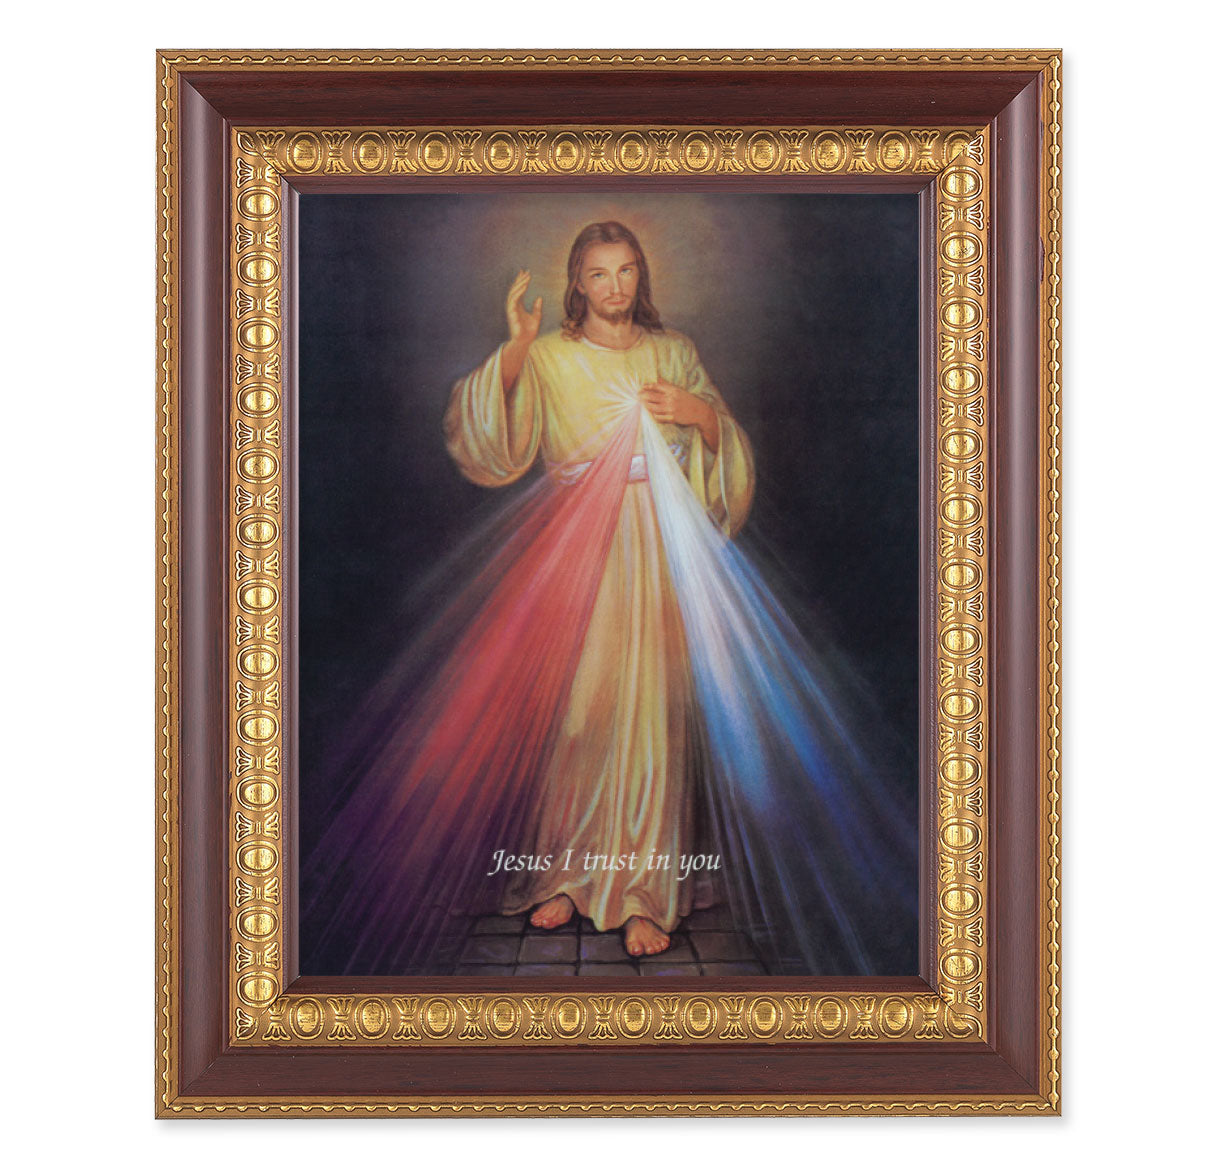 Divine Mercy Picture Framed Wall Art Decor, Large, Dark Cherry with Gold Egg and Dart Detailed Frame